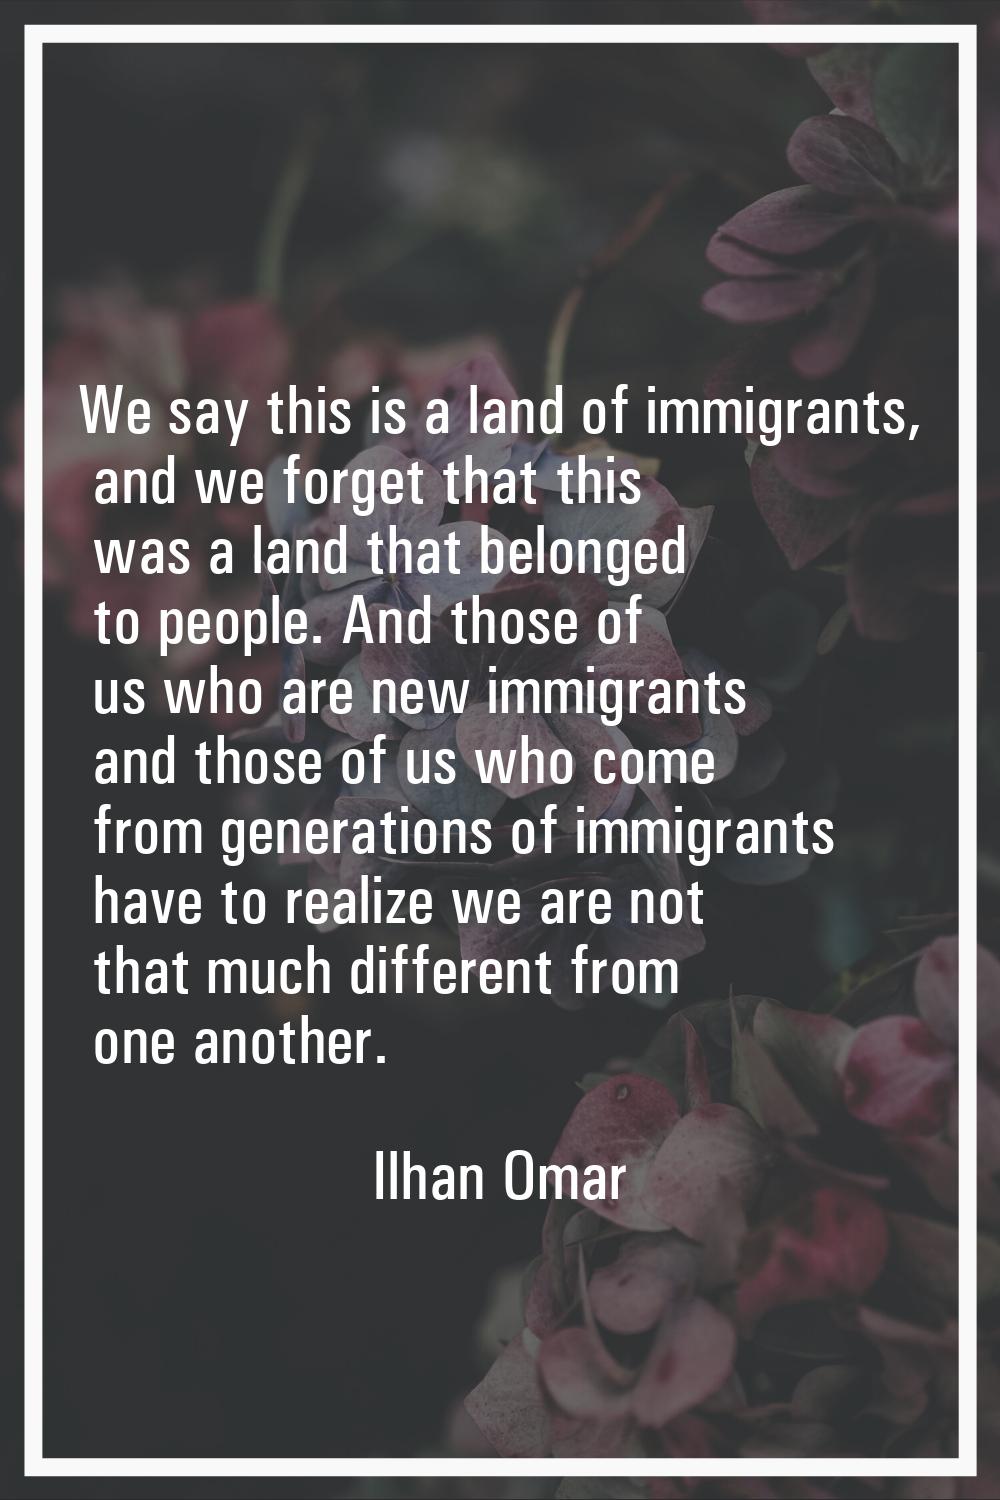 We say this is a land of immigrants, and we forget that this was a land that belonged to people. An